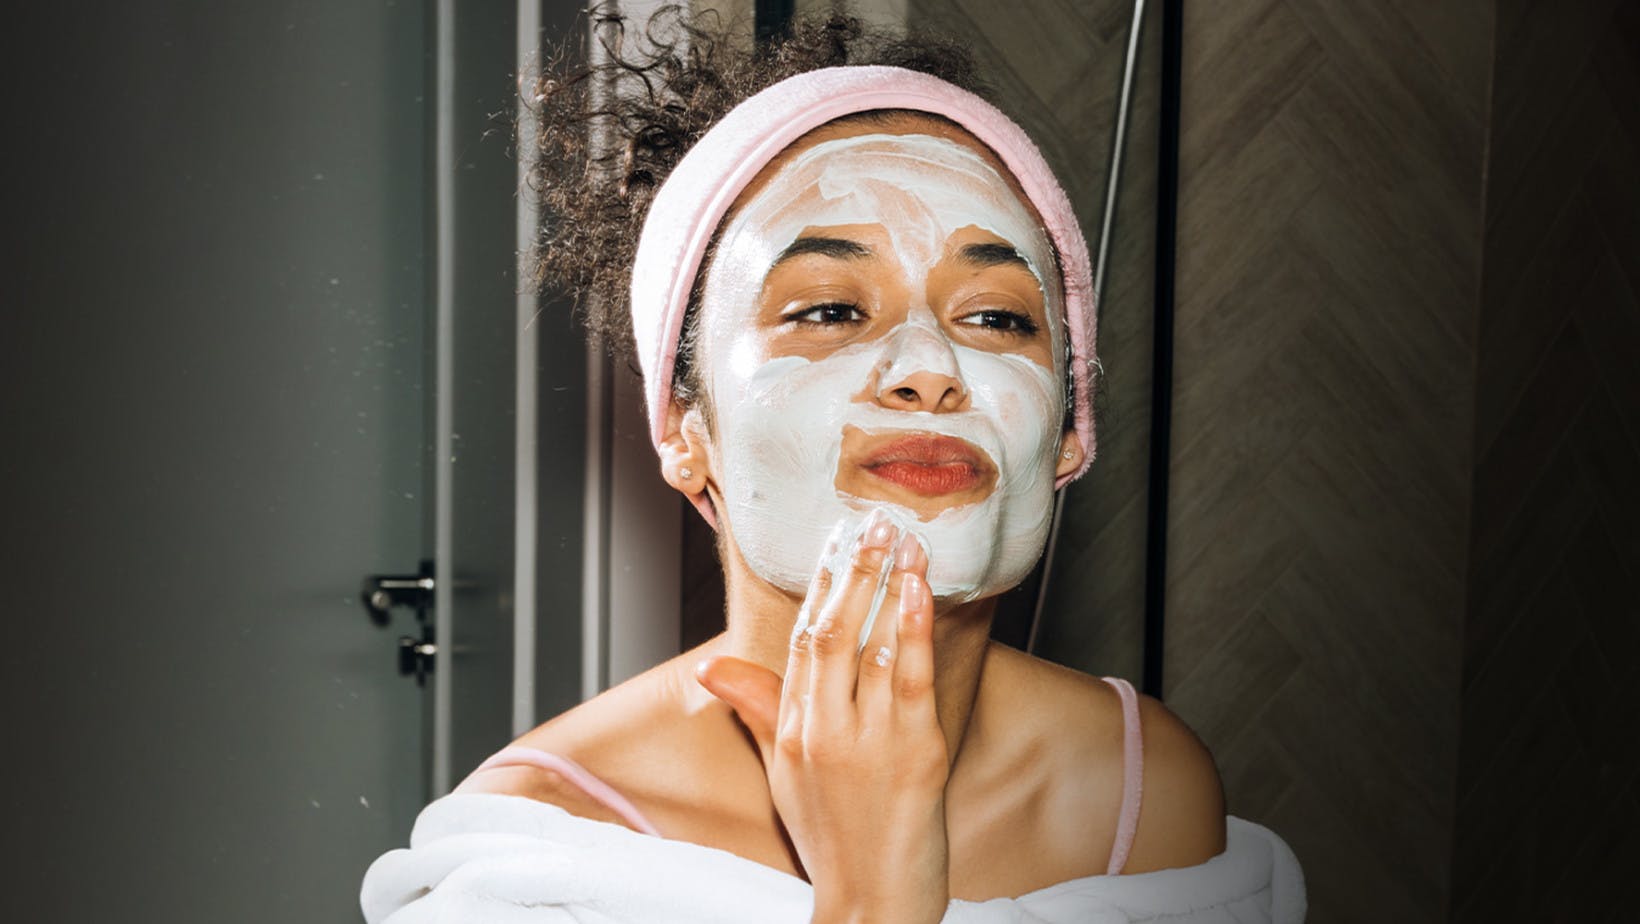 Female college student practicing self-care by putting on a facial mask